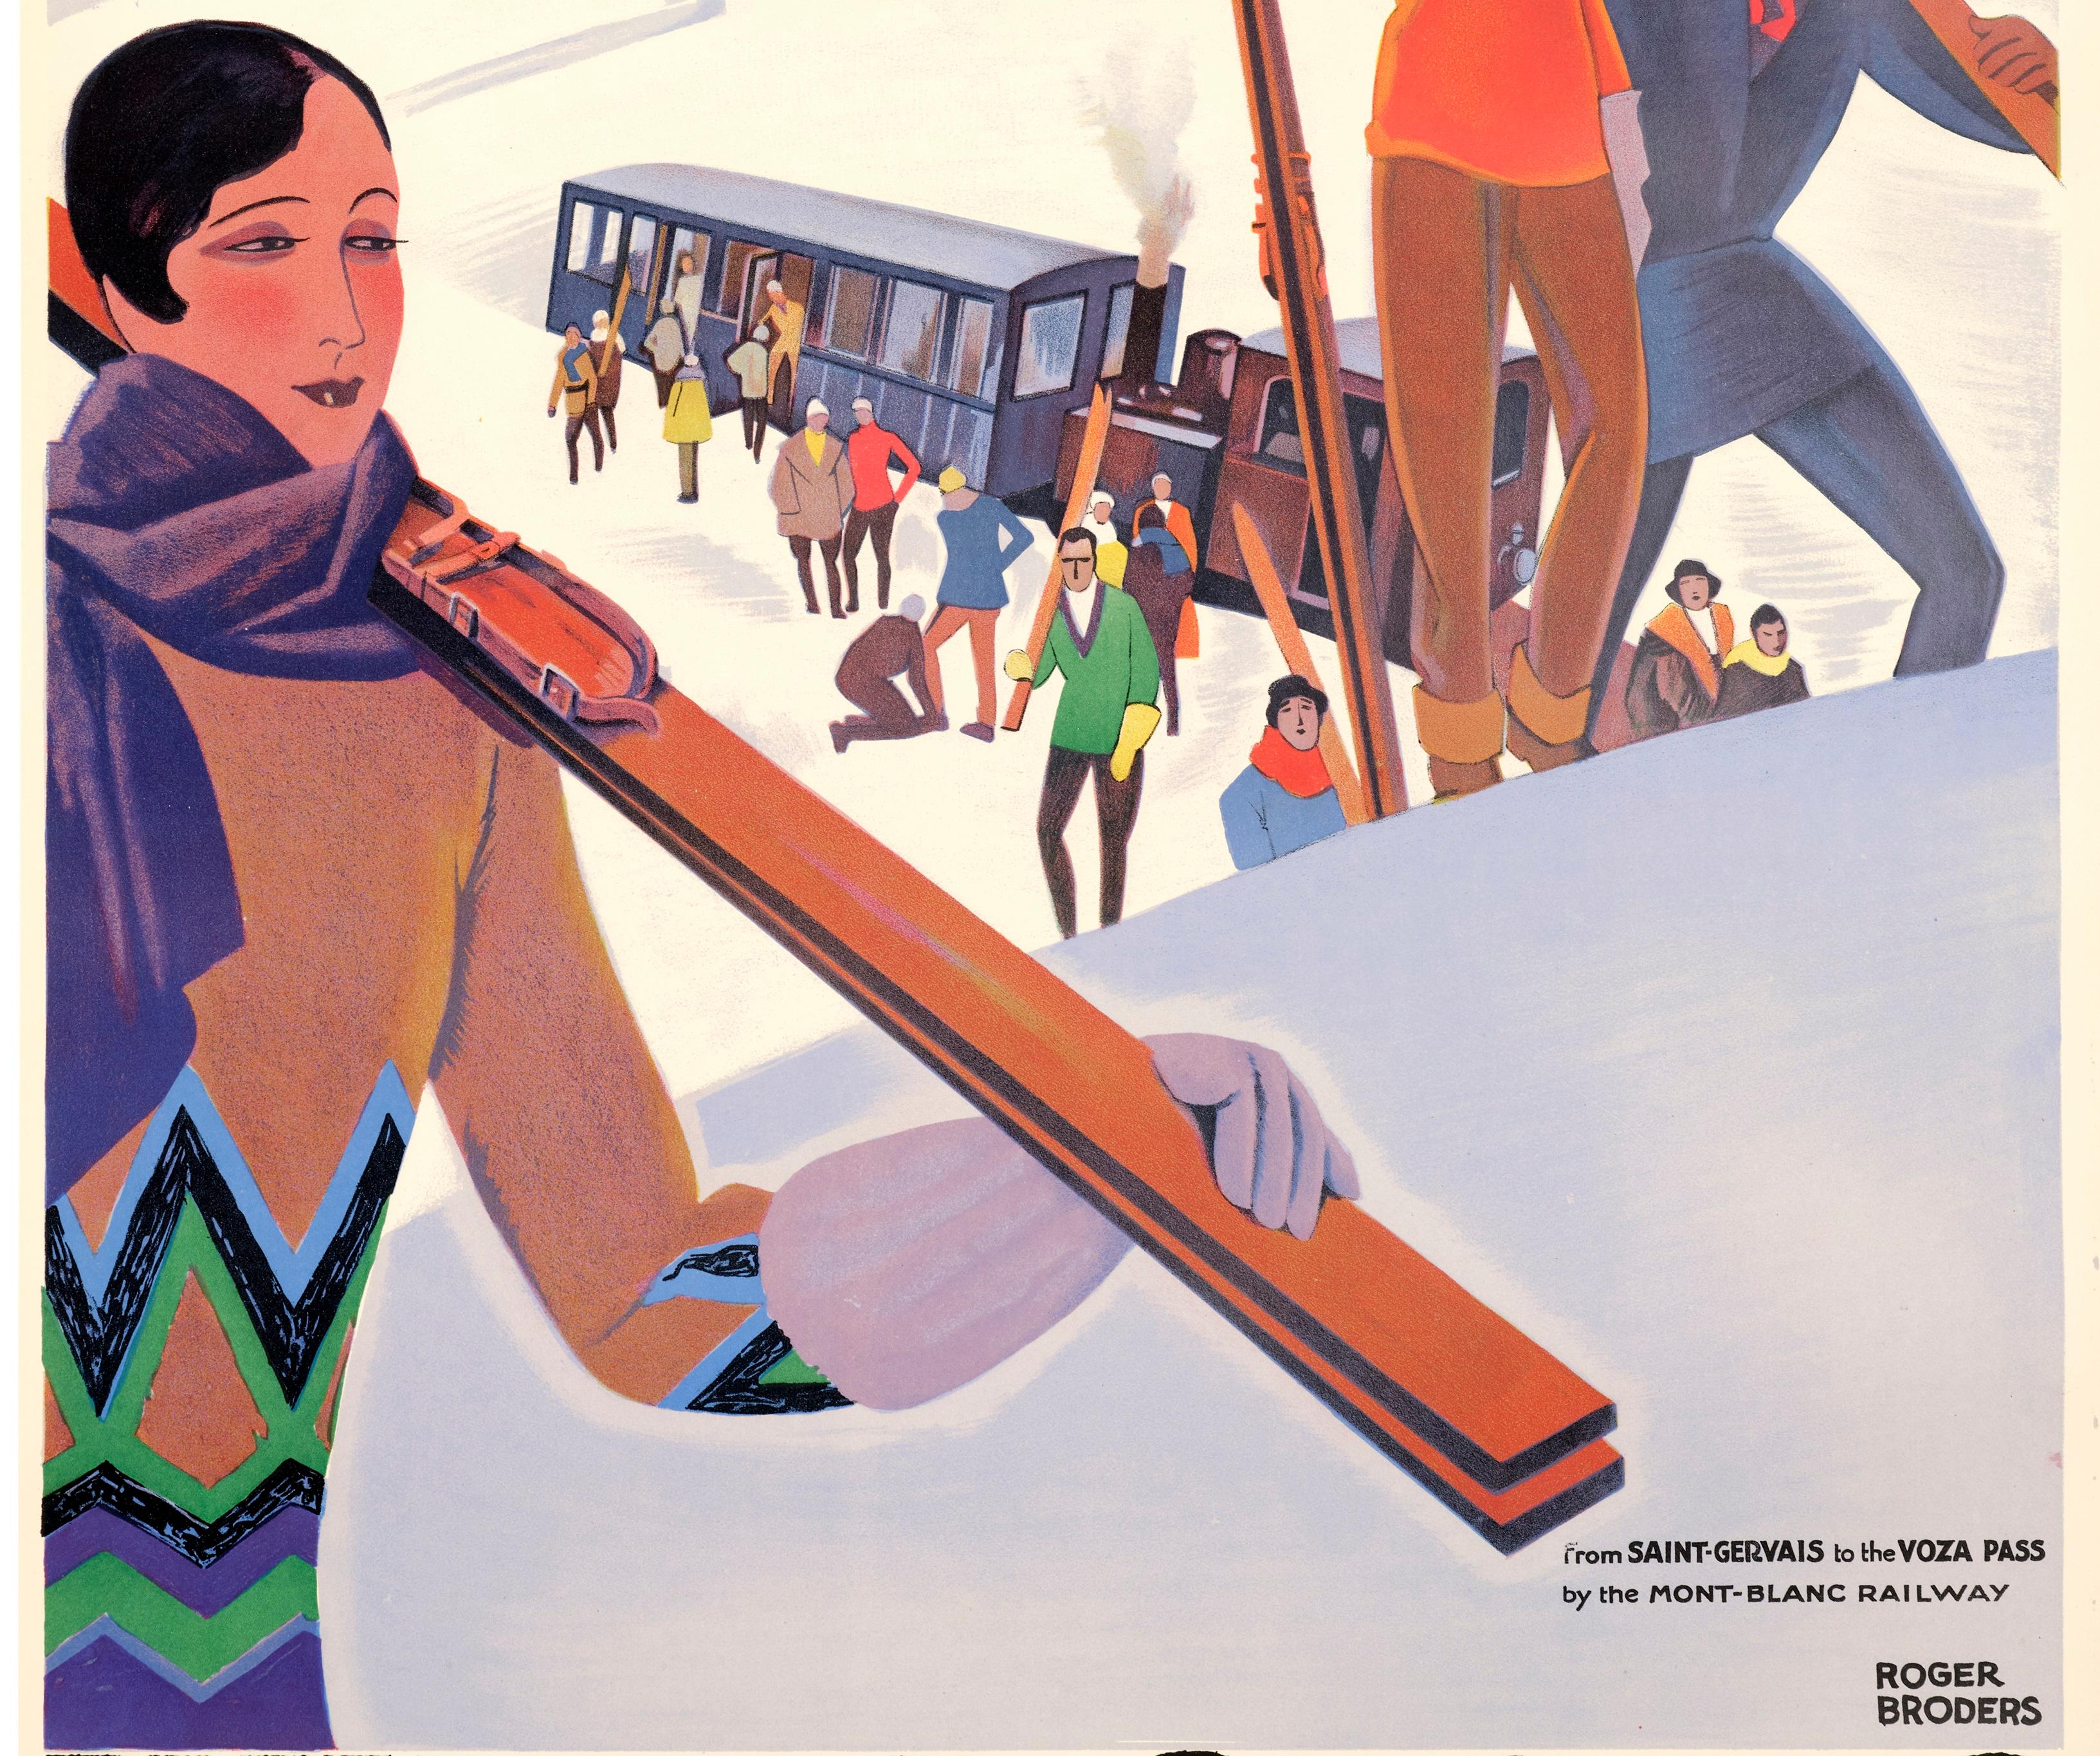 Paper Broders, Original Art Deco Poster, Winter Sports, Voza Pass Skiing Mountain 1929 For Sale